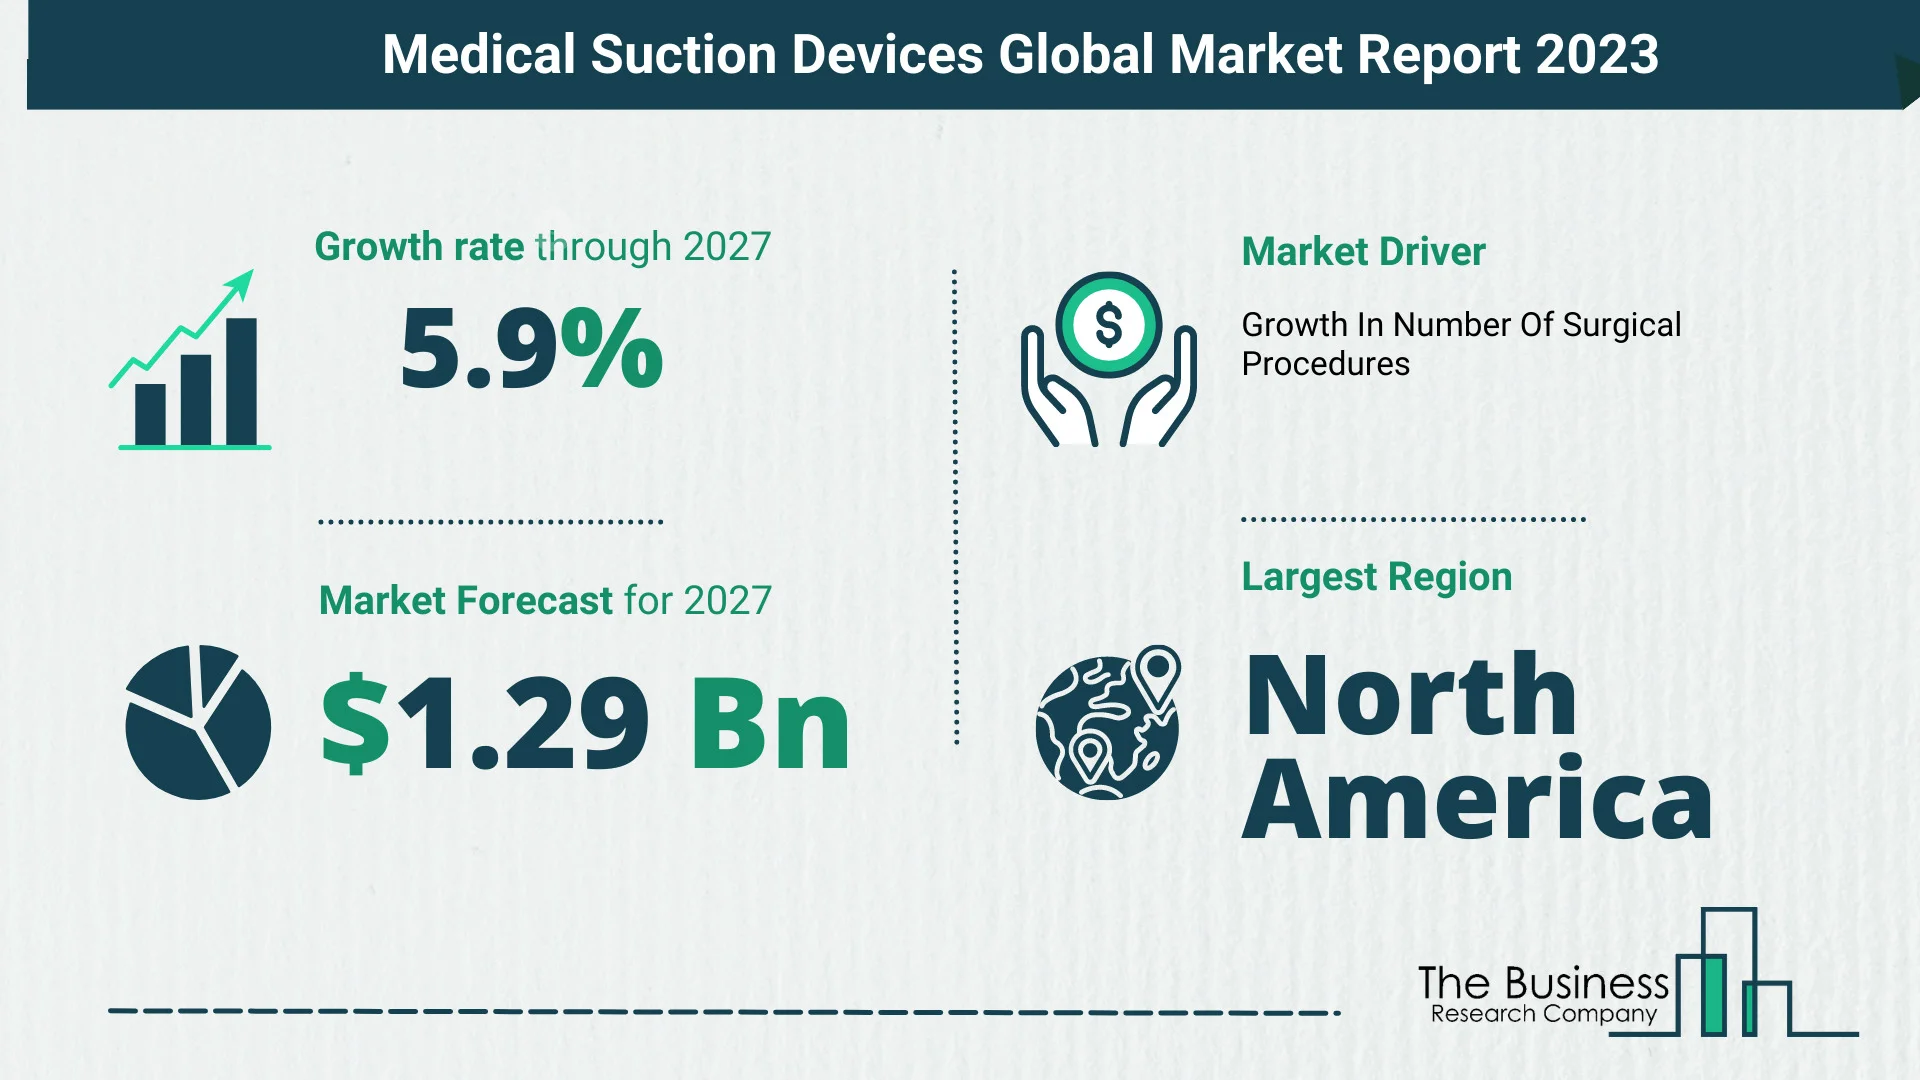 Medical Suction Devices Market Size, Share, And Growth Rate Analysis 2023